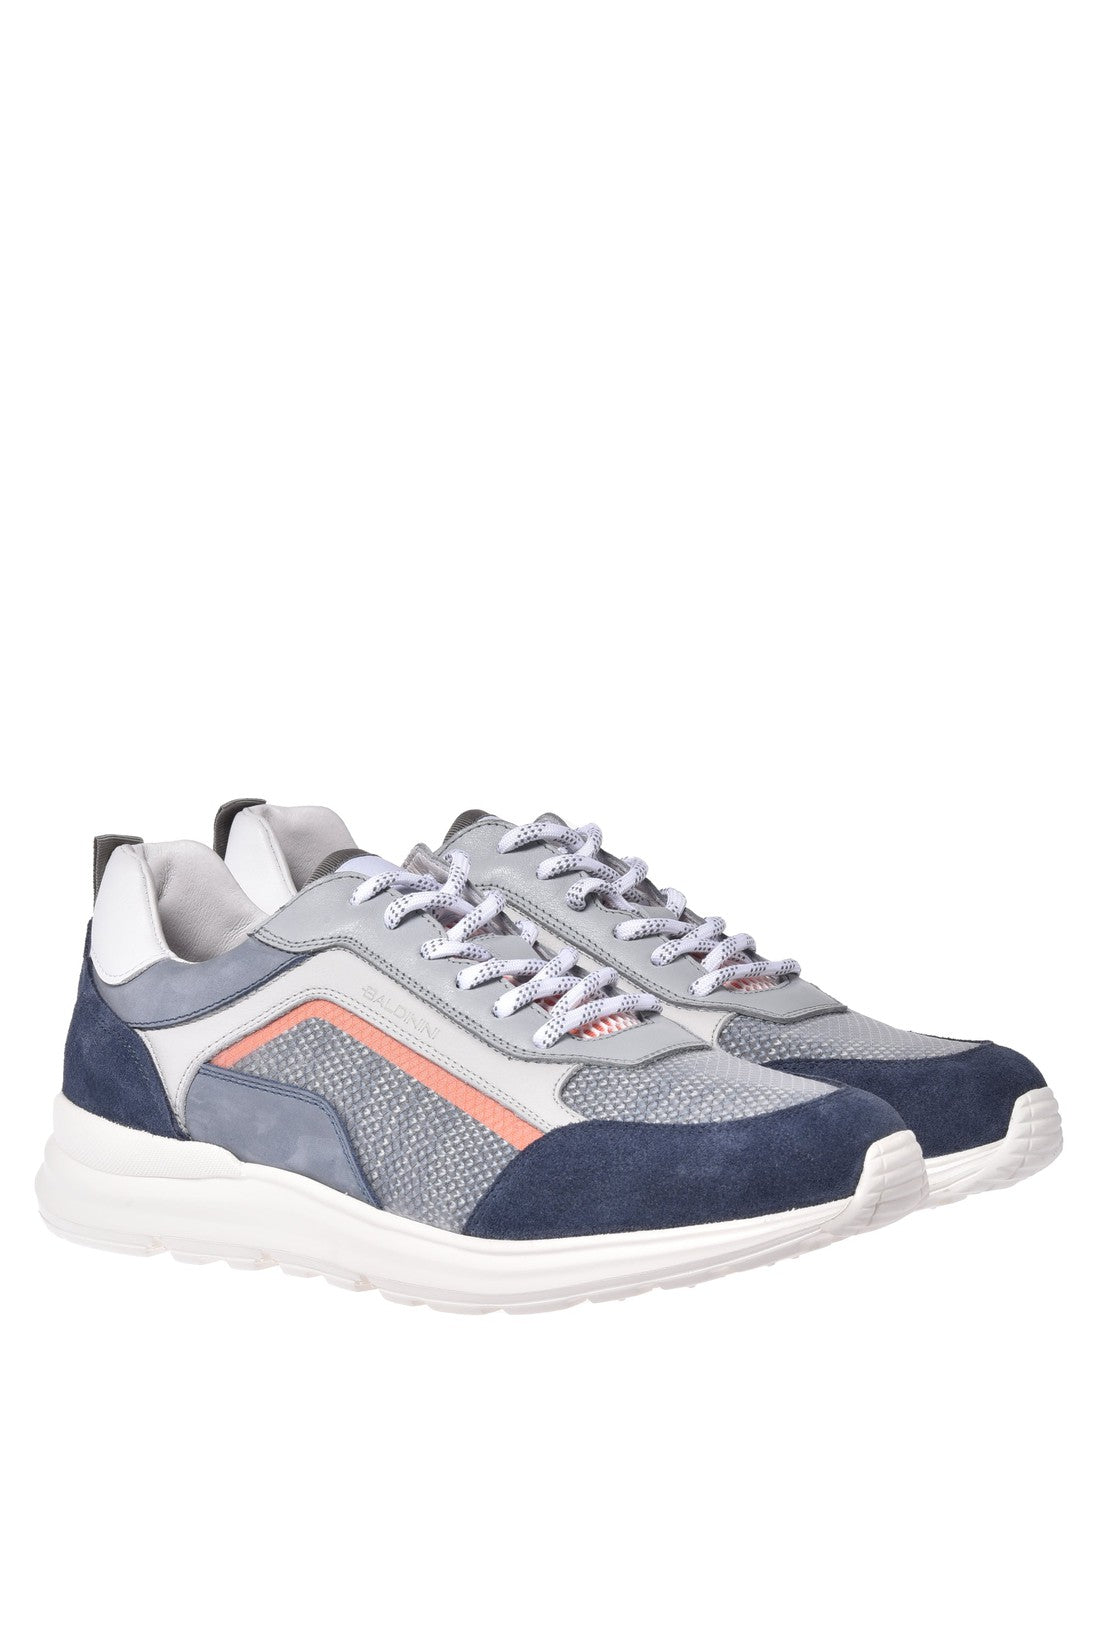 Sneaker in denim leather and fabric